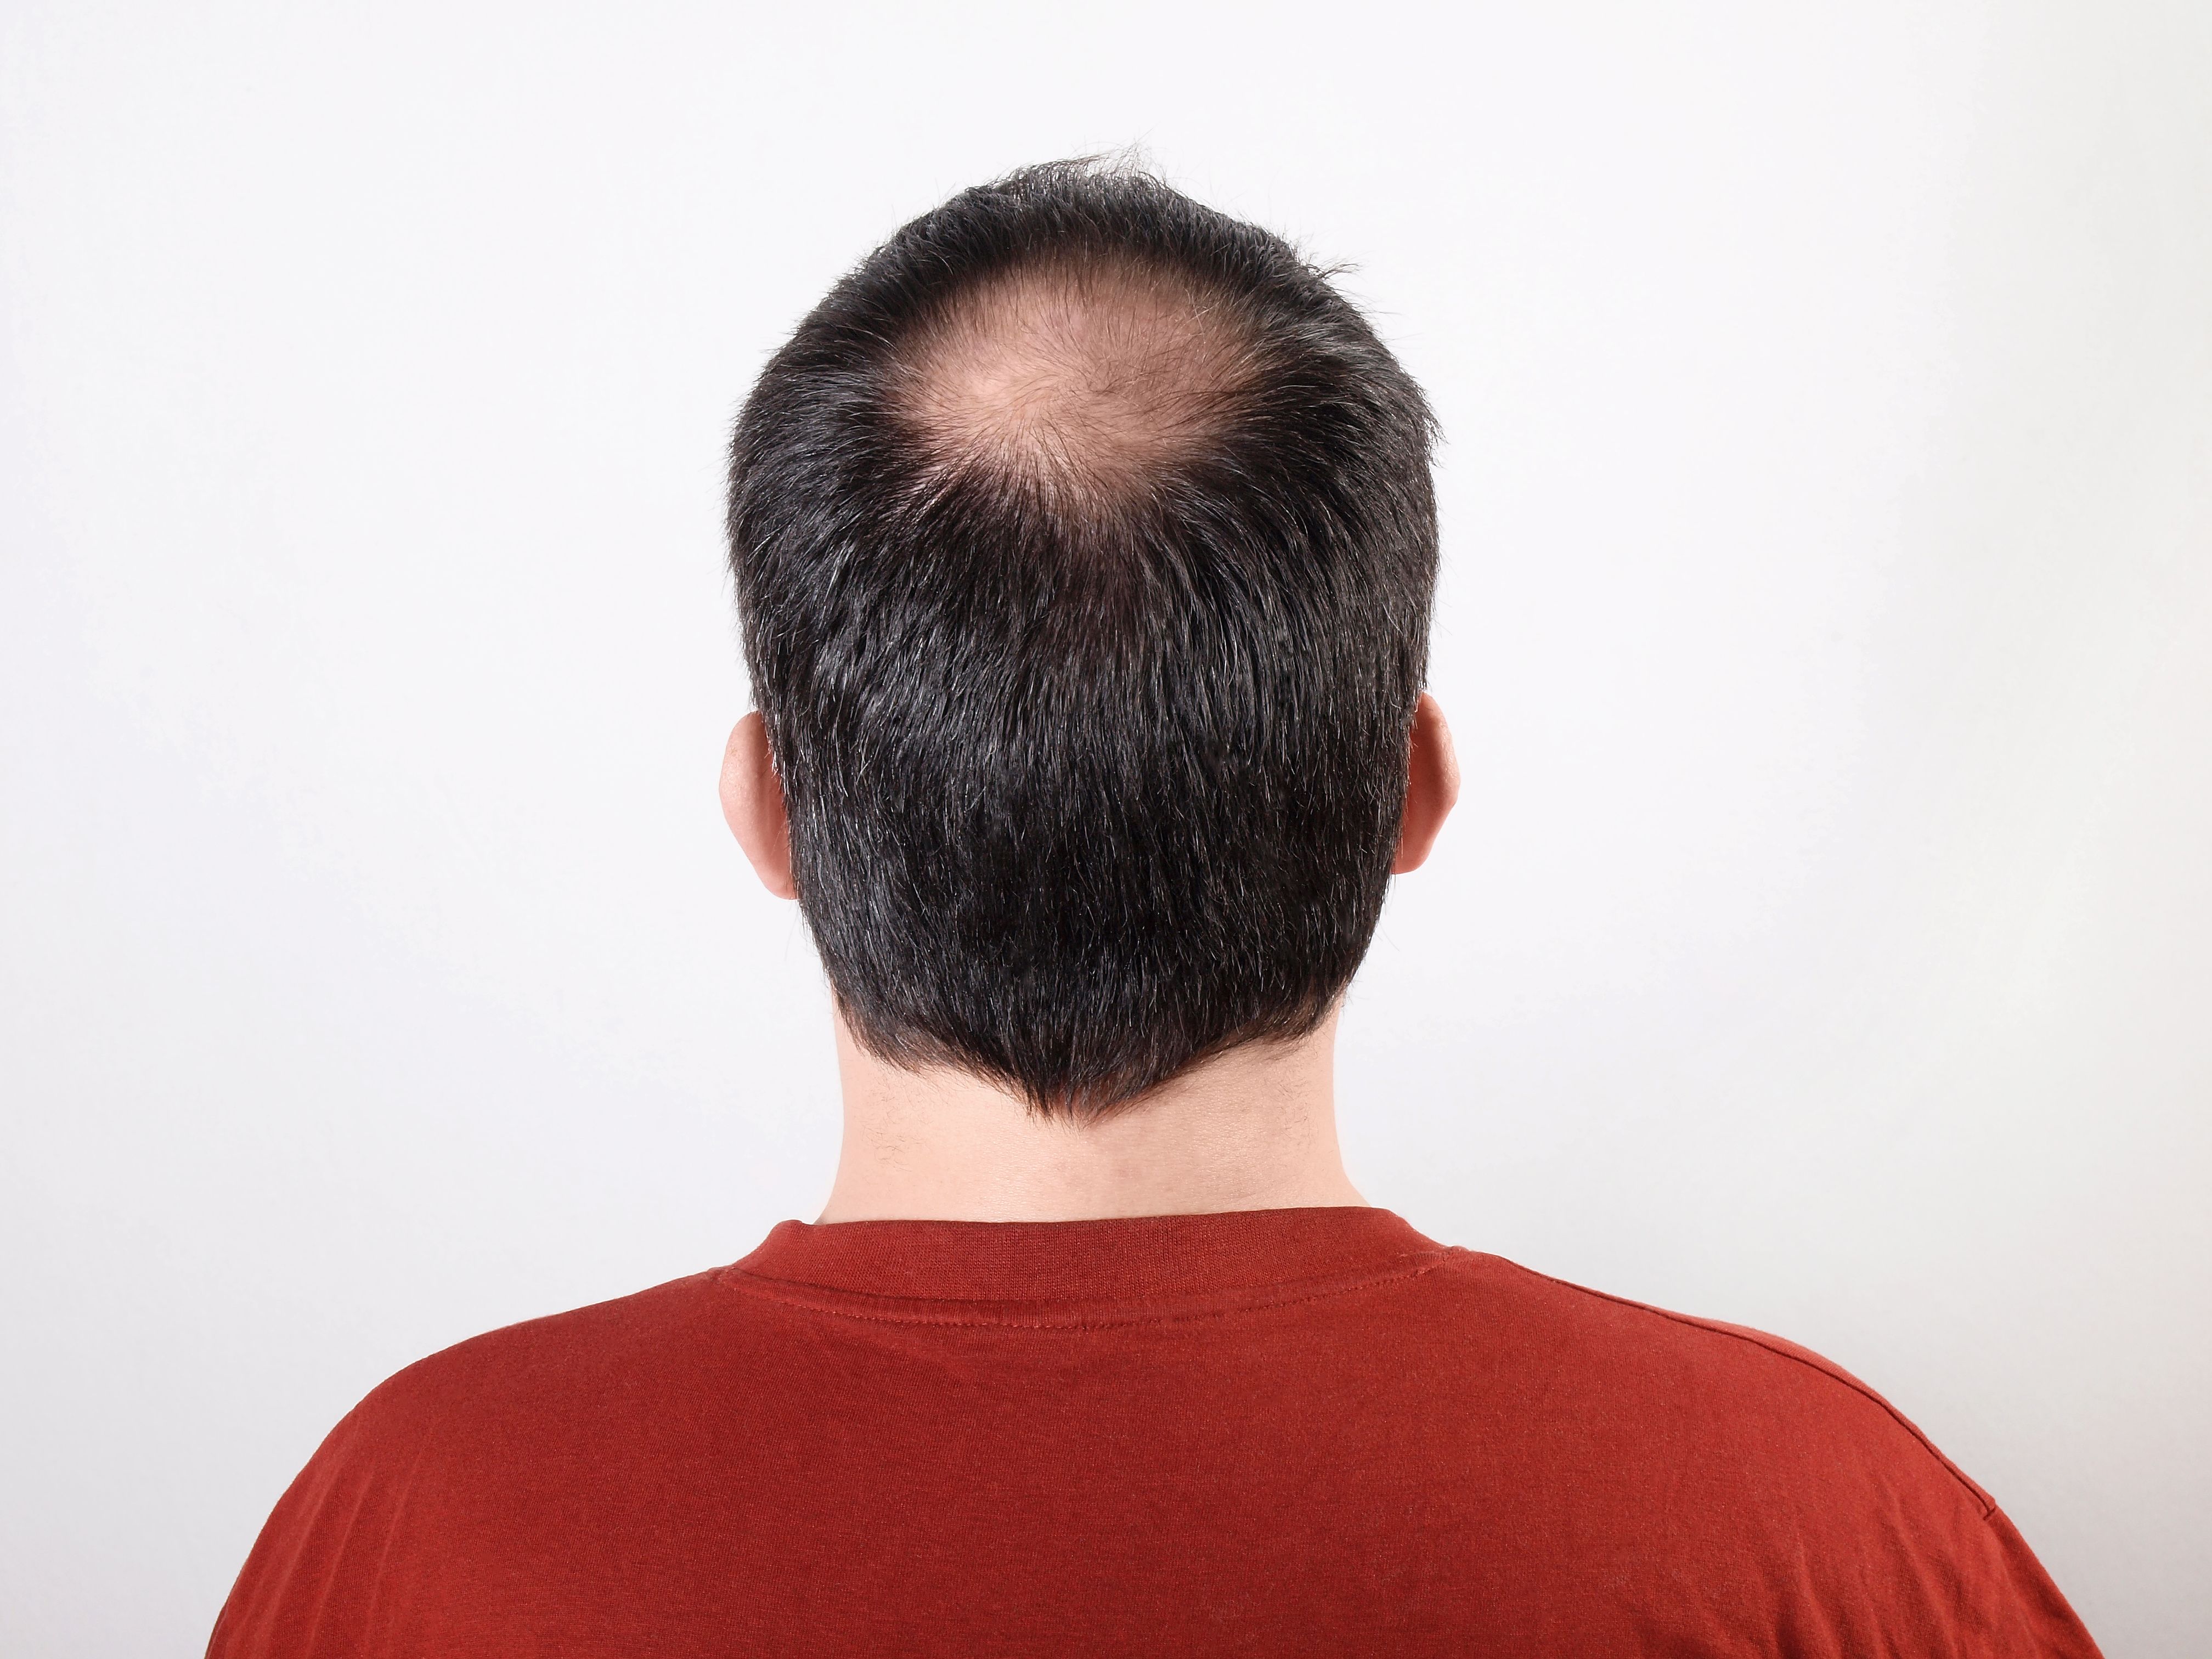 One male hair loss treatment works better than others, study finds | CNN